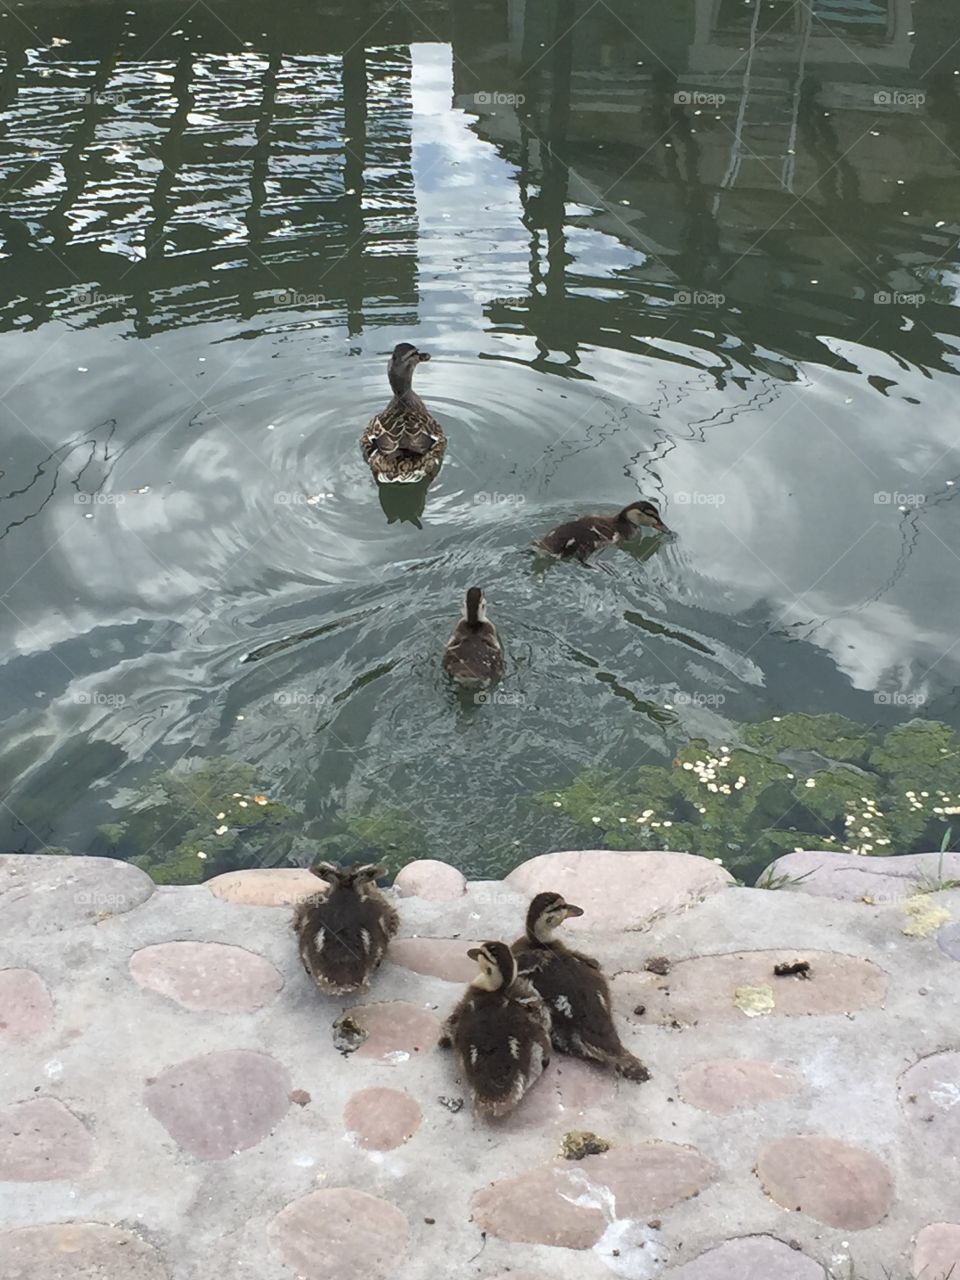 Mommy Duck & Ducklings. @chelseamerkleyphotos Copyright © CM Photography May 2019.